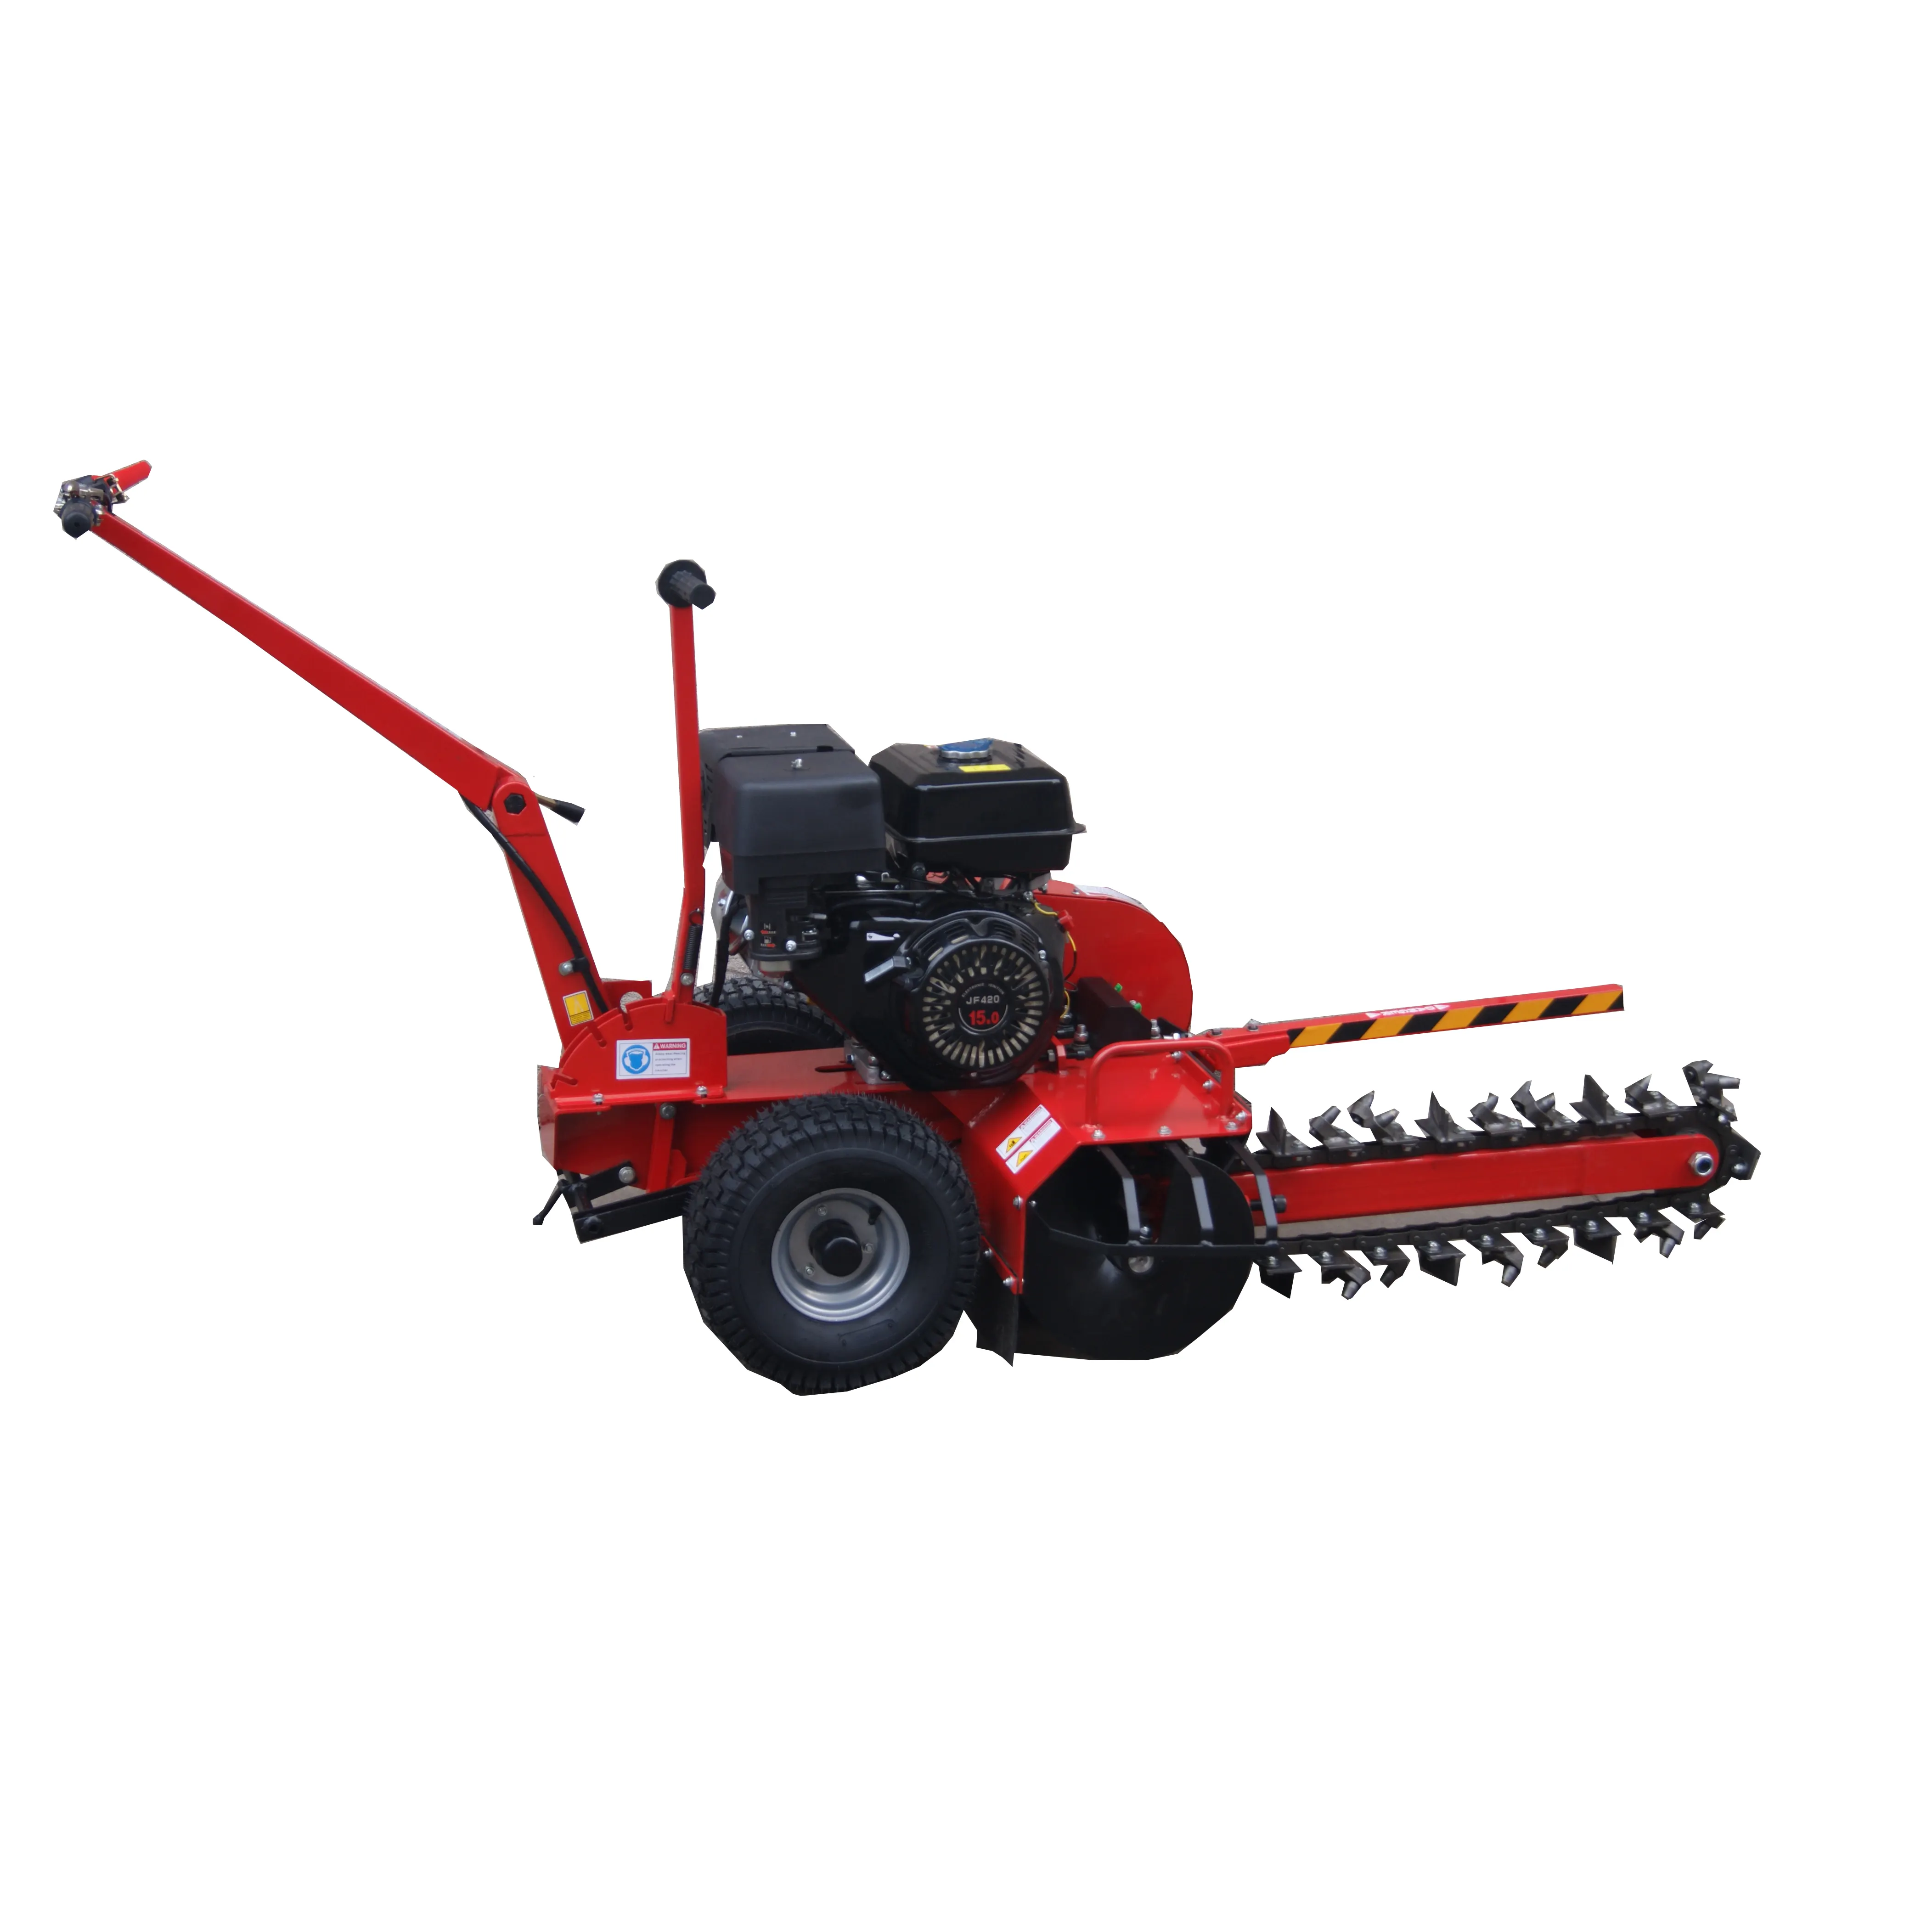 wholesale 7Hp max 450mm trench depth tractor trencher,trencher machine,